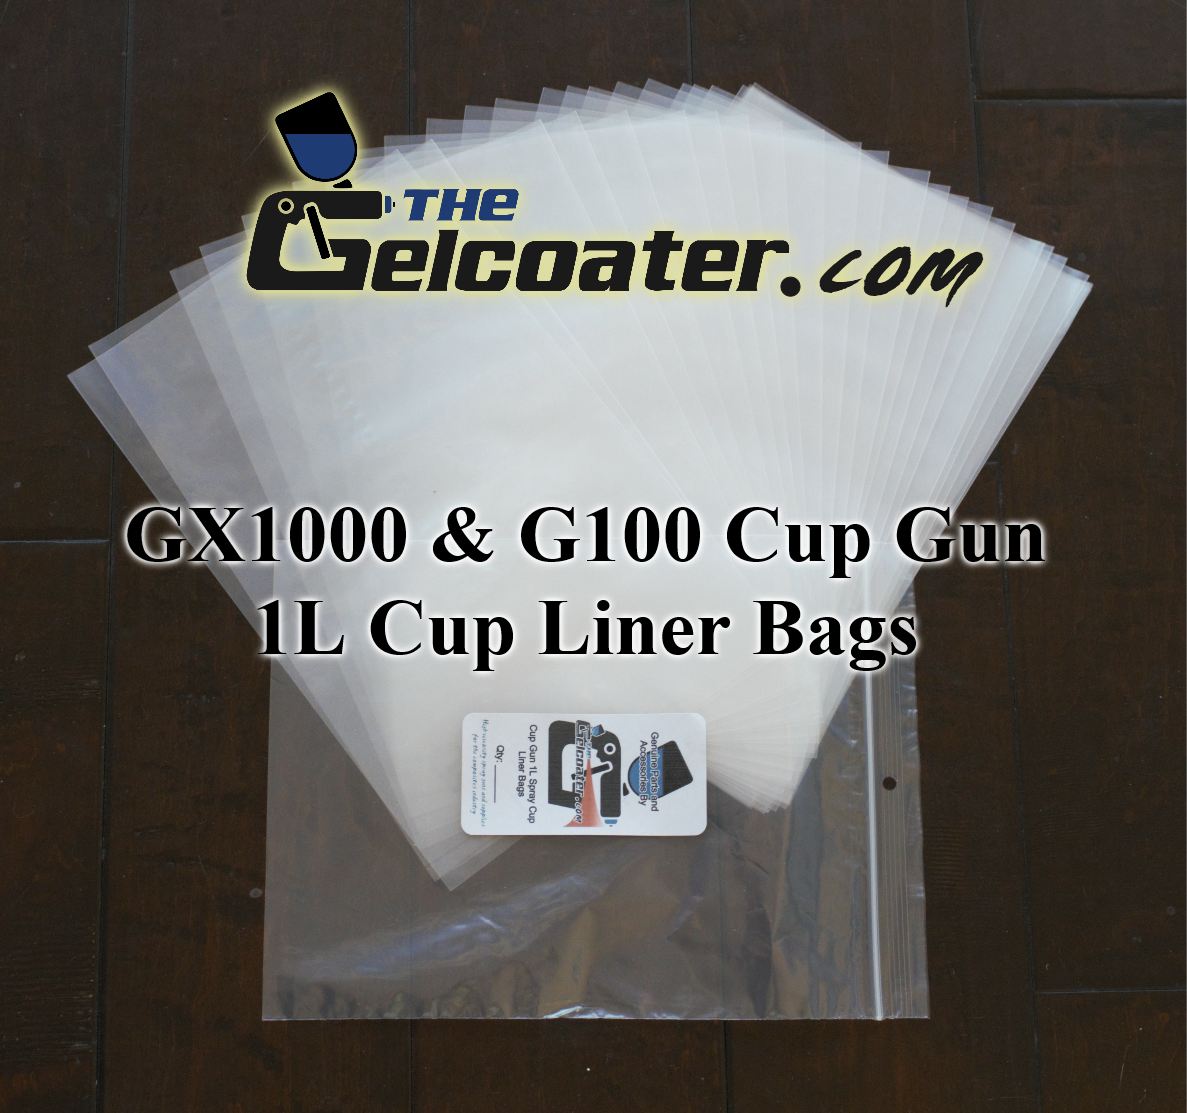 cup gun liner bags spread out